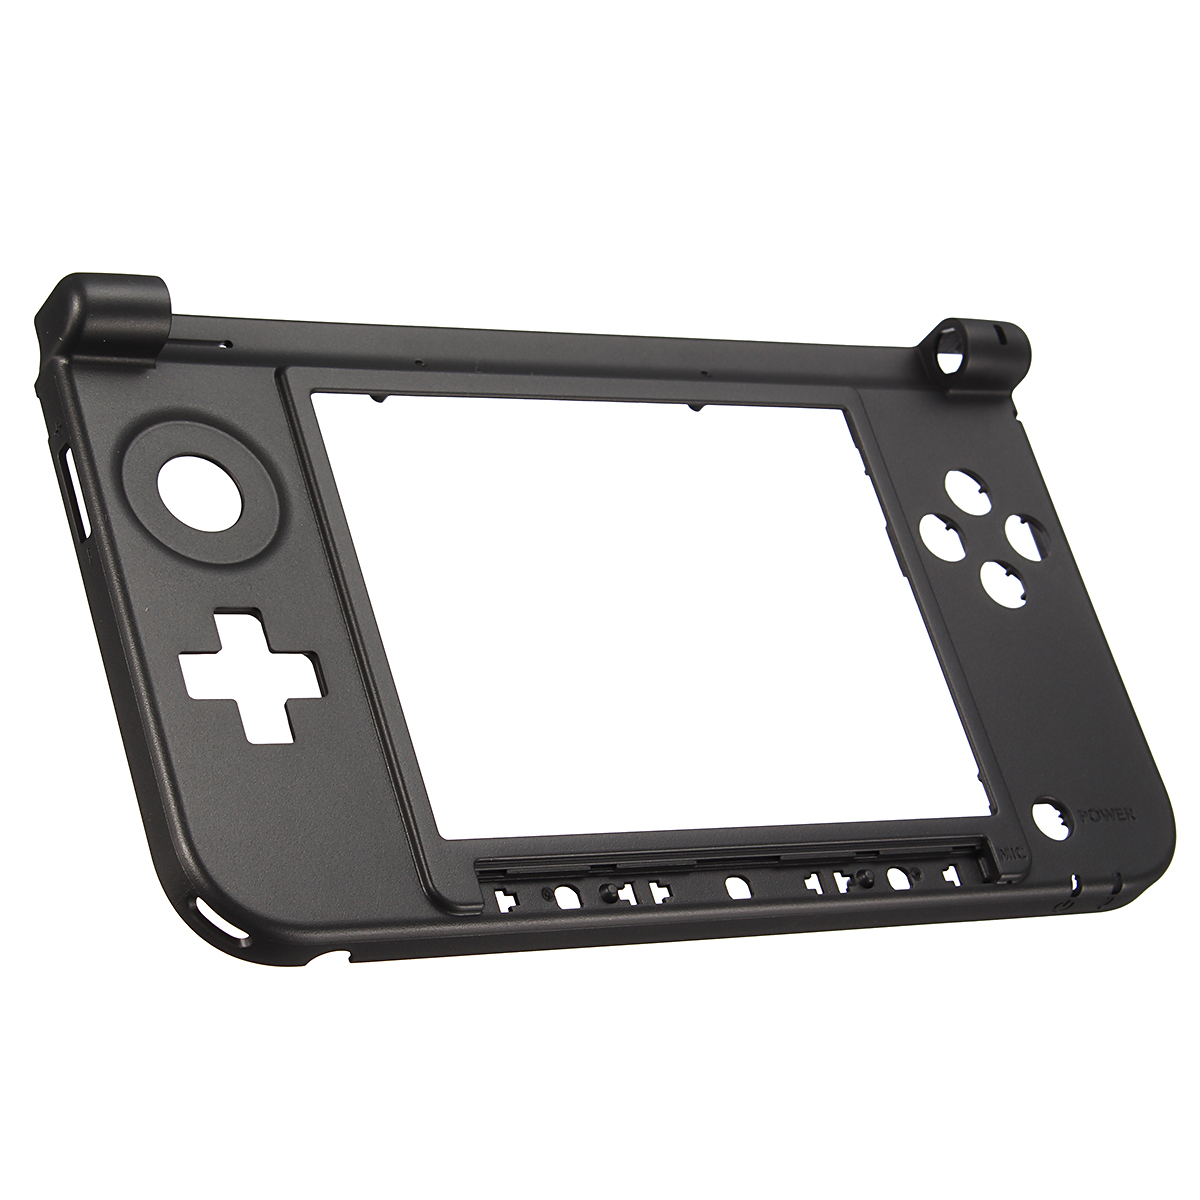 Replacement Bottom Middle Frame Housing Shell Cover Case for Nintendo 3DS XL 3DS LL Game Console 31